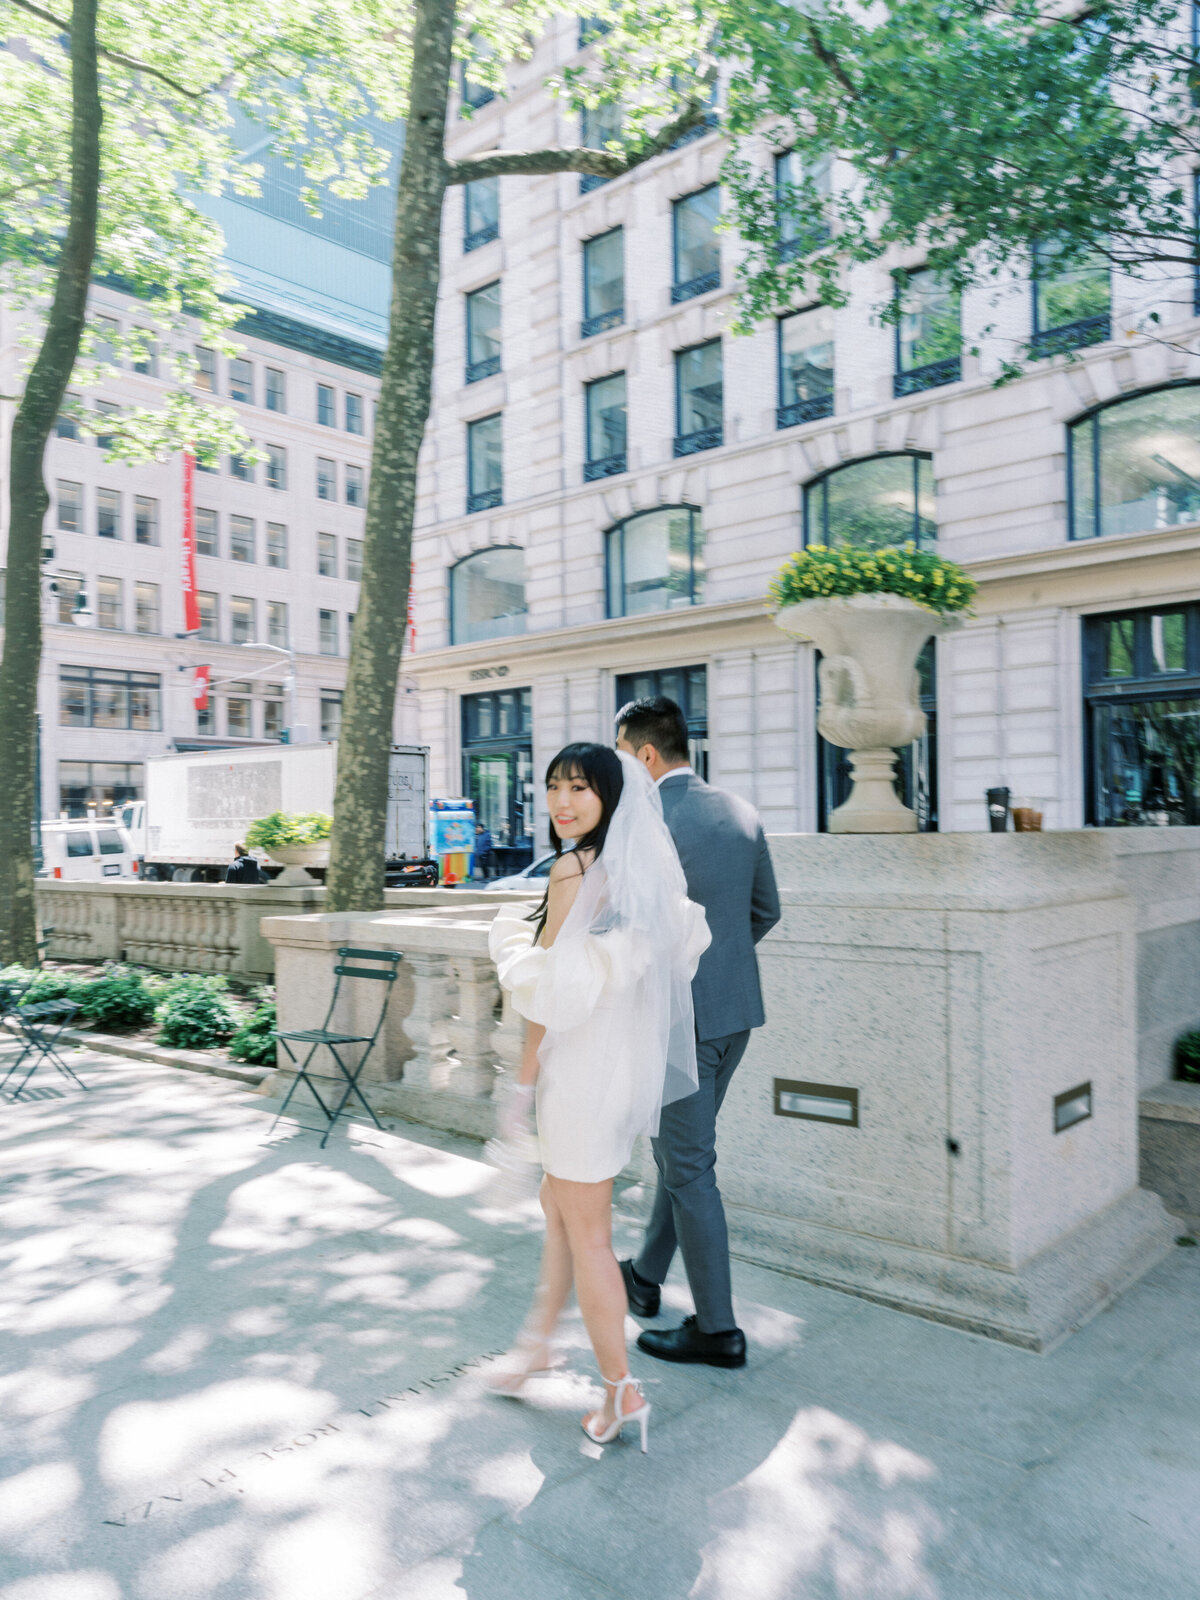 Vogue Editiorial NYC Elopement Themed Engagement Session Highlights | Amarachi Ikeji Photography 42